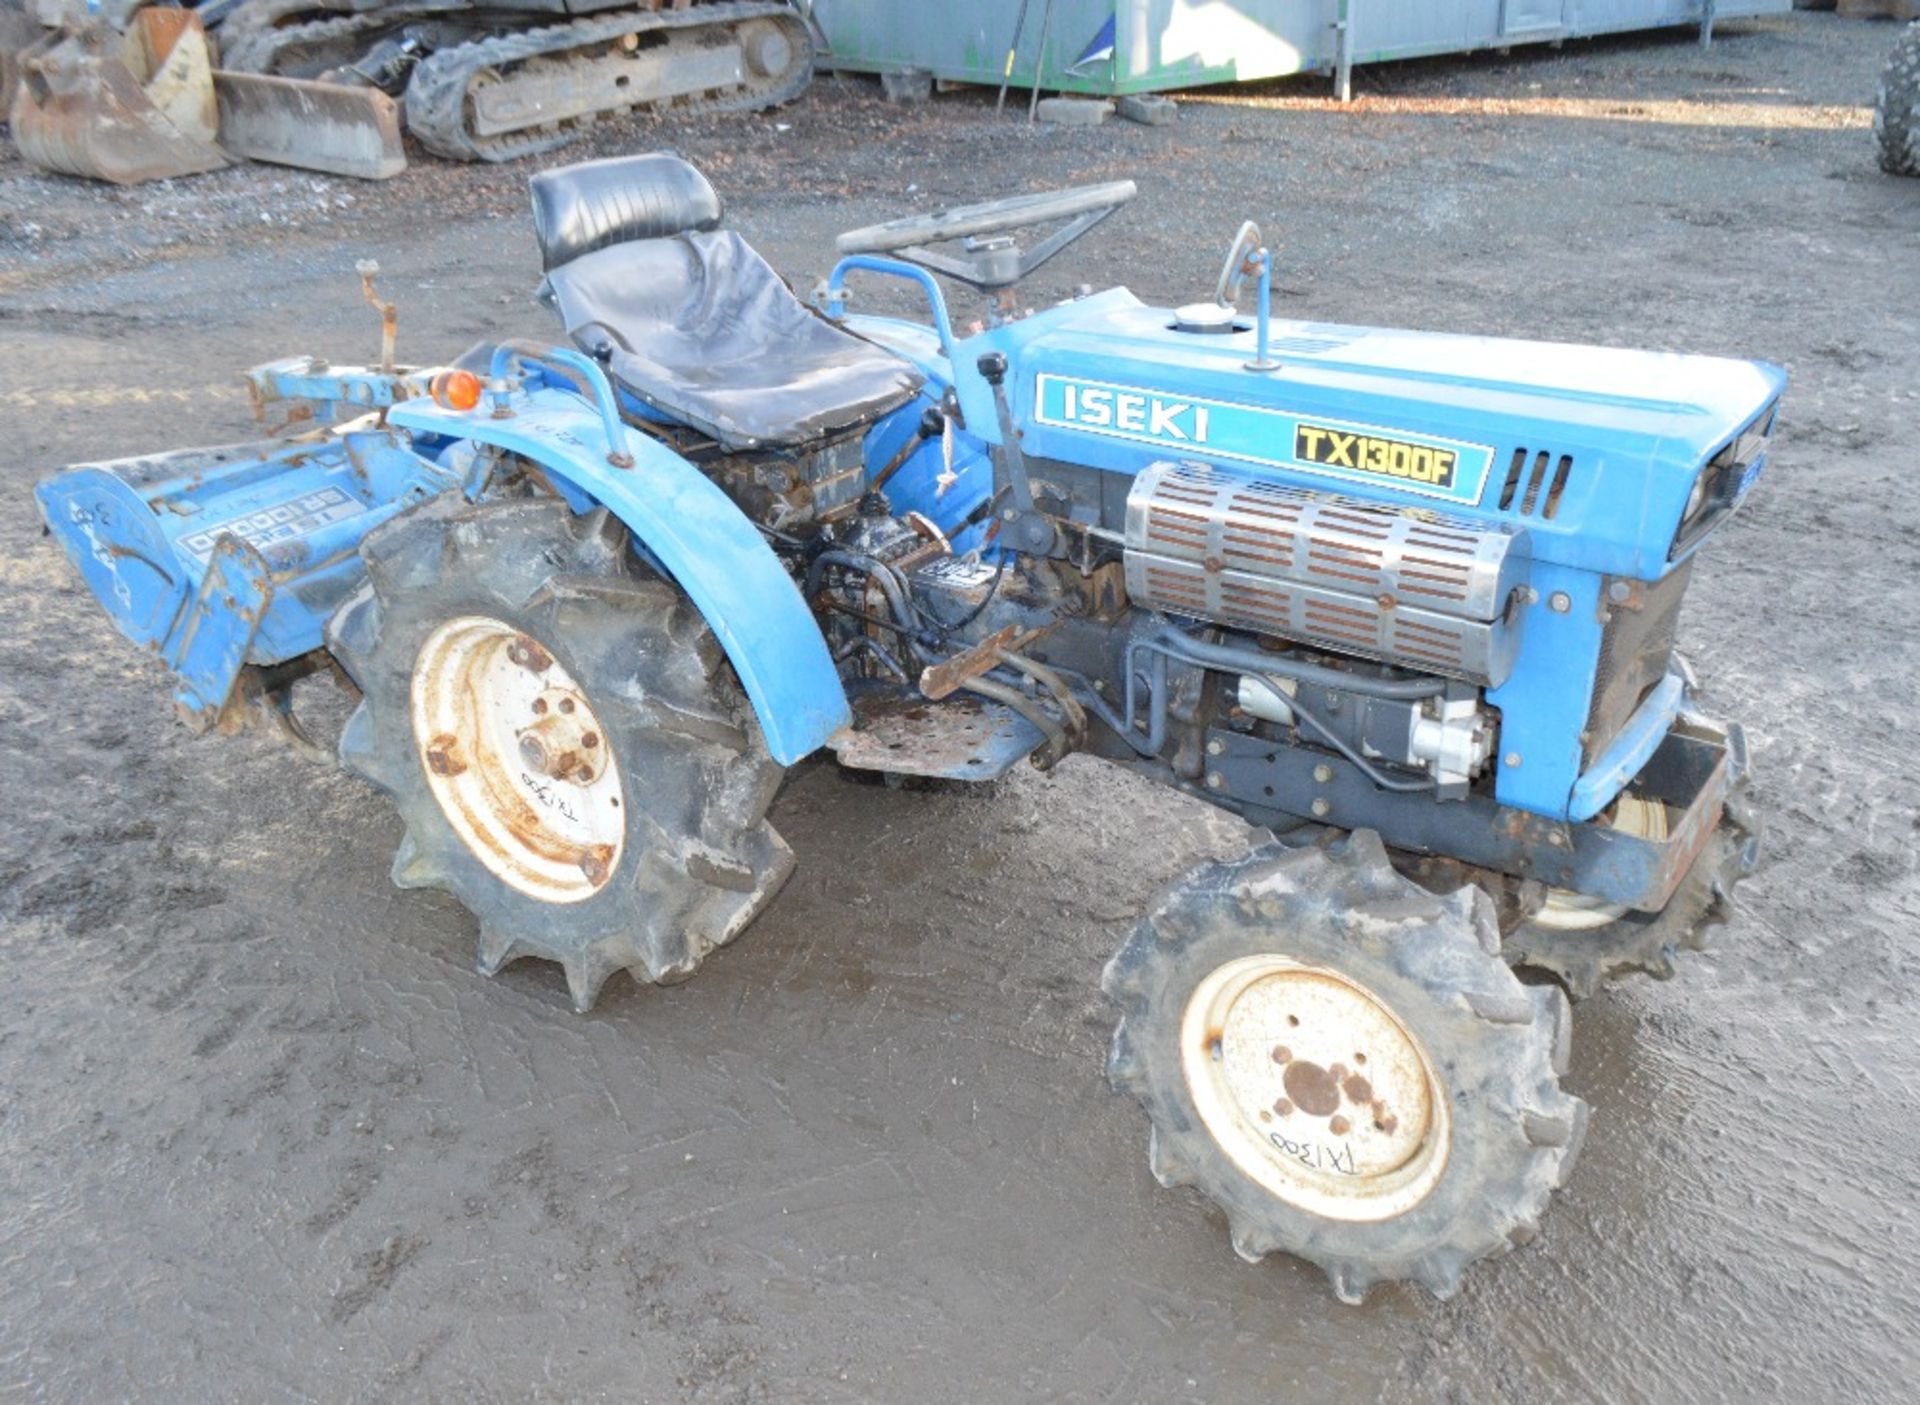 Iseki TX 1300 F diesel driven 4wd compact tractor - Image 4 of 7